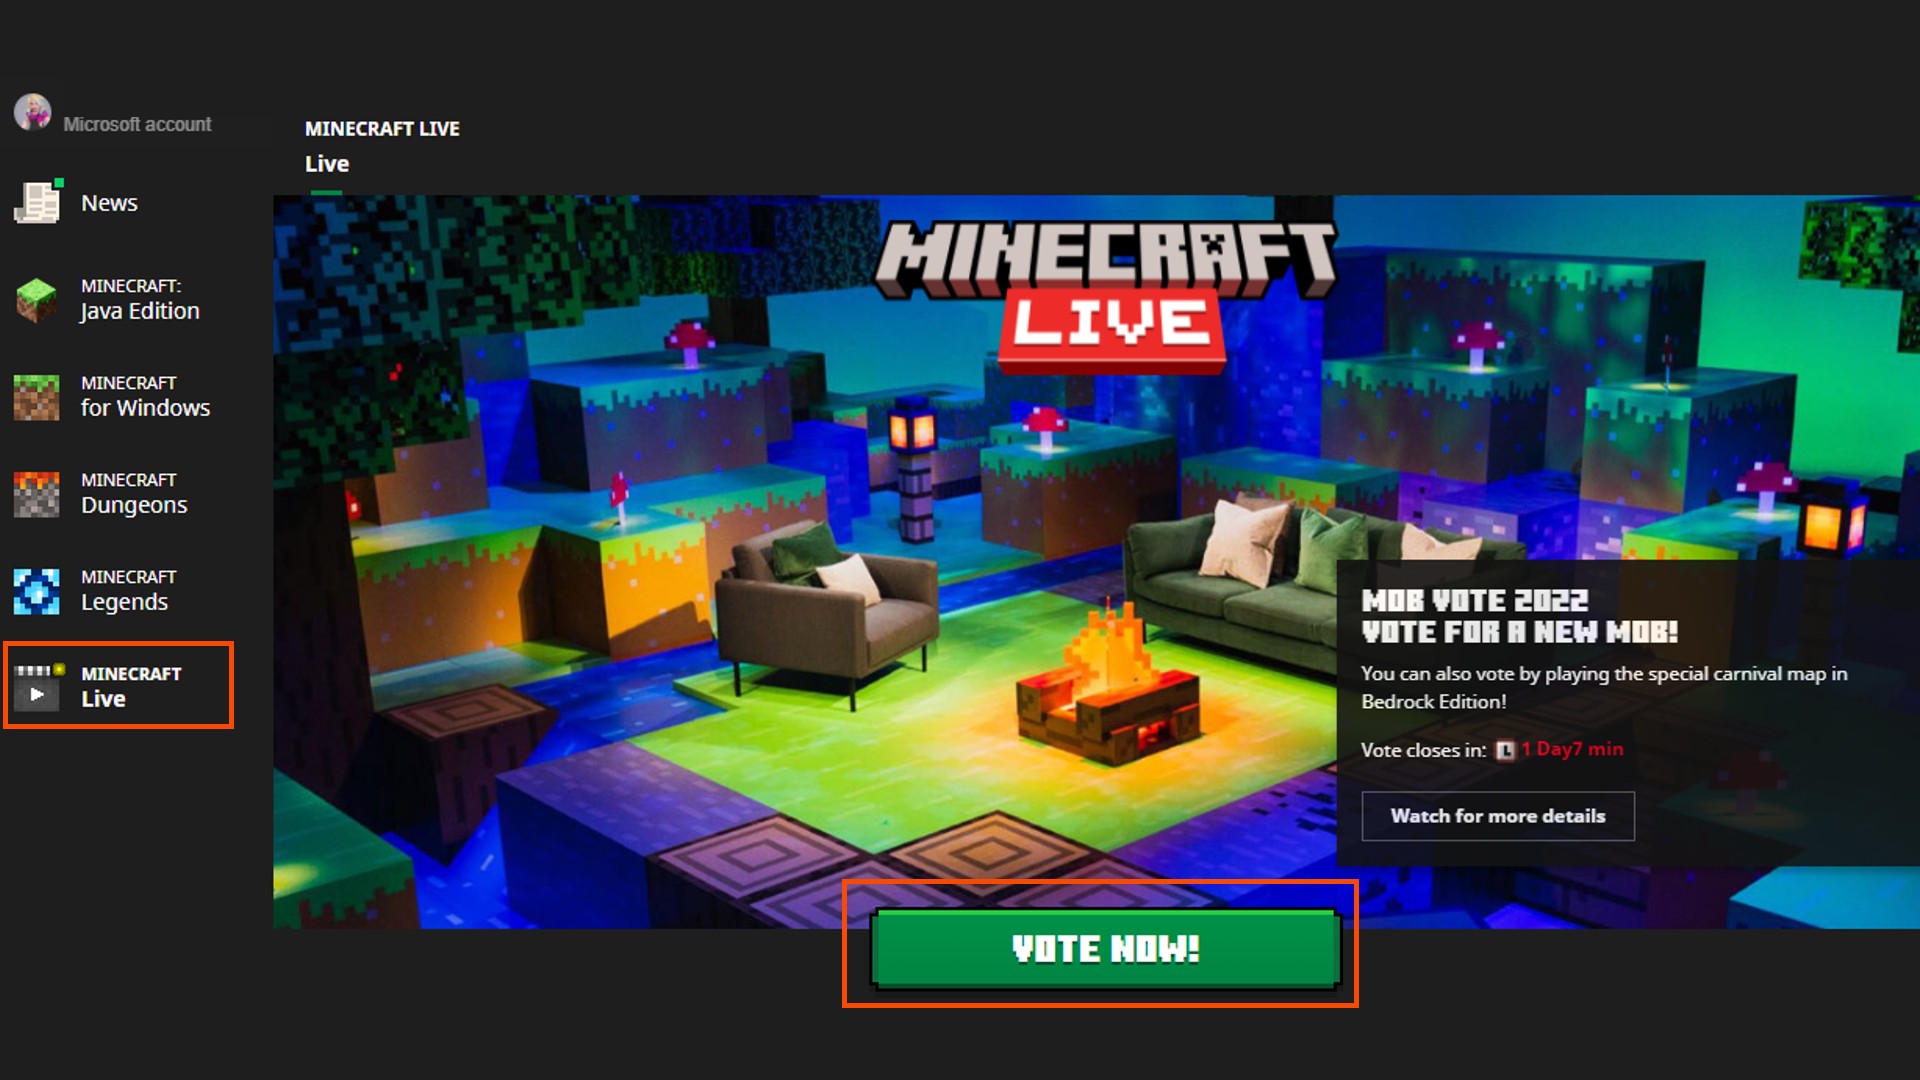 Minecraft Live's next mob vote is happening in-game